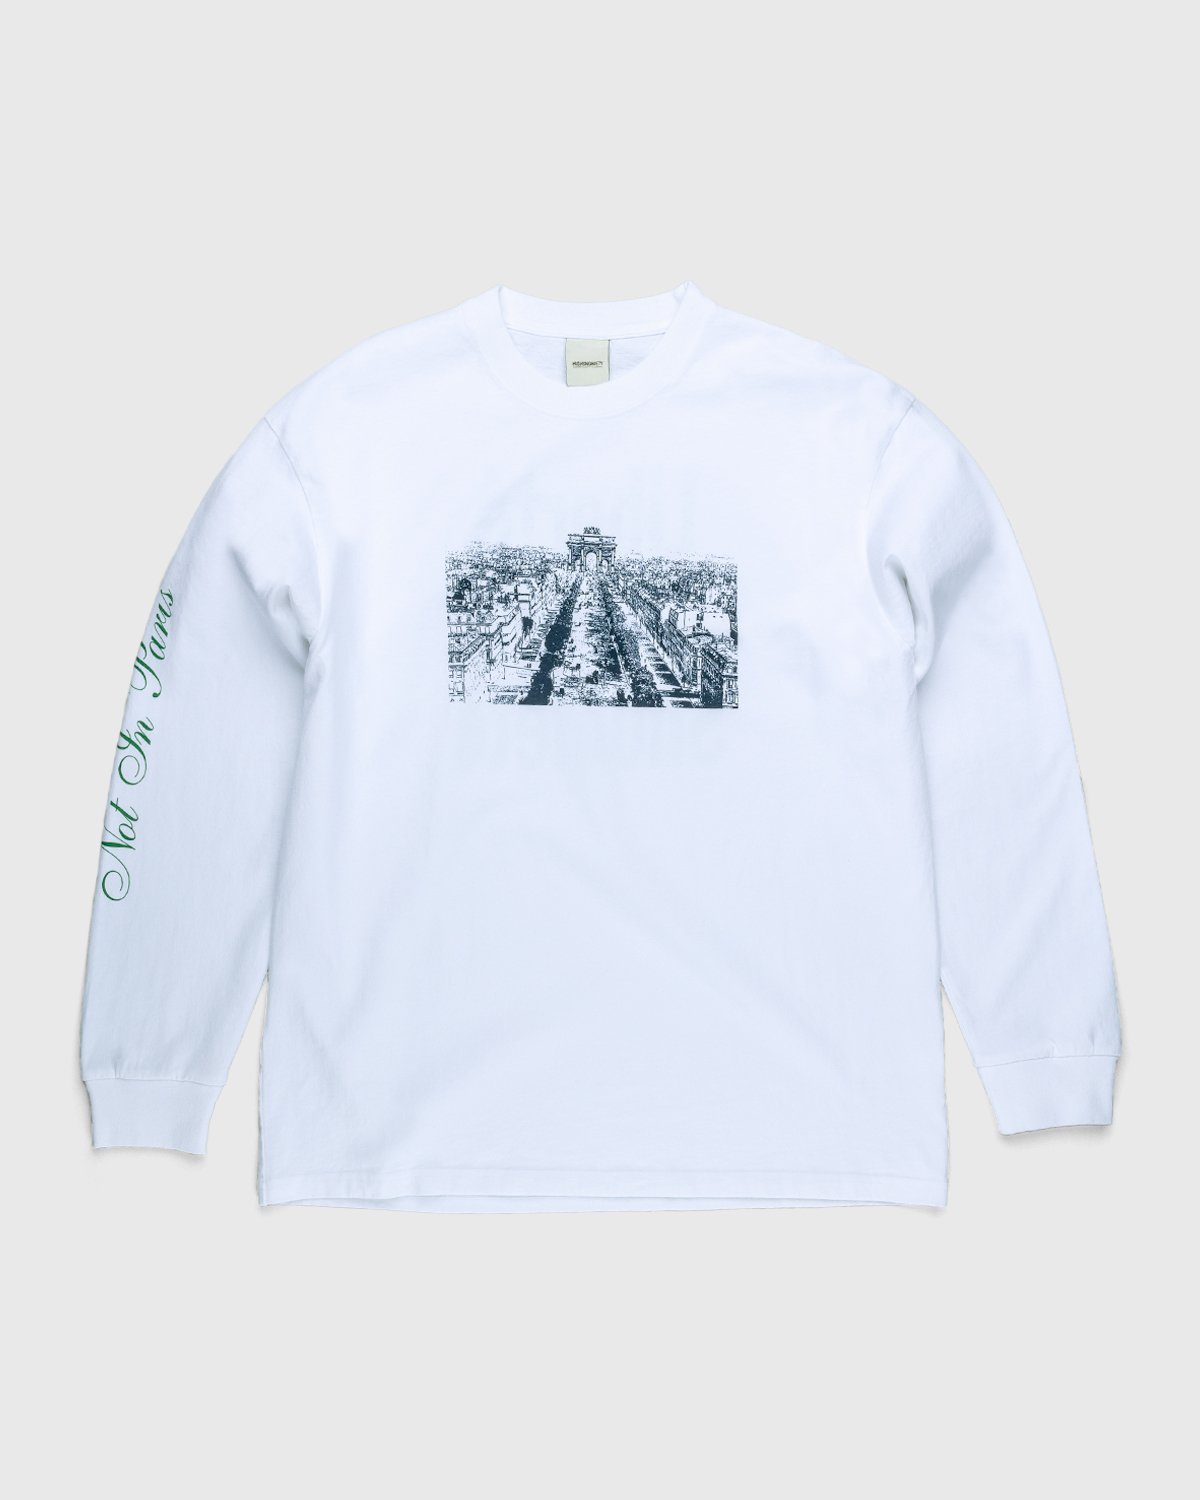 Highsnobiety - Not In Paris 3 Champs-Elysees Longsleeve White - Clothing - White - Image 1